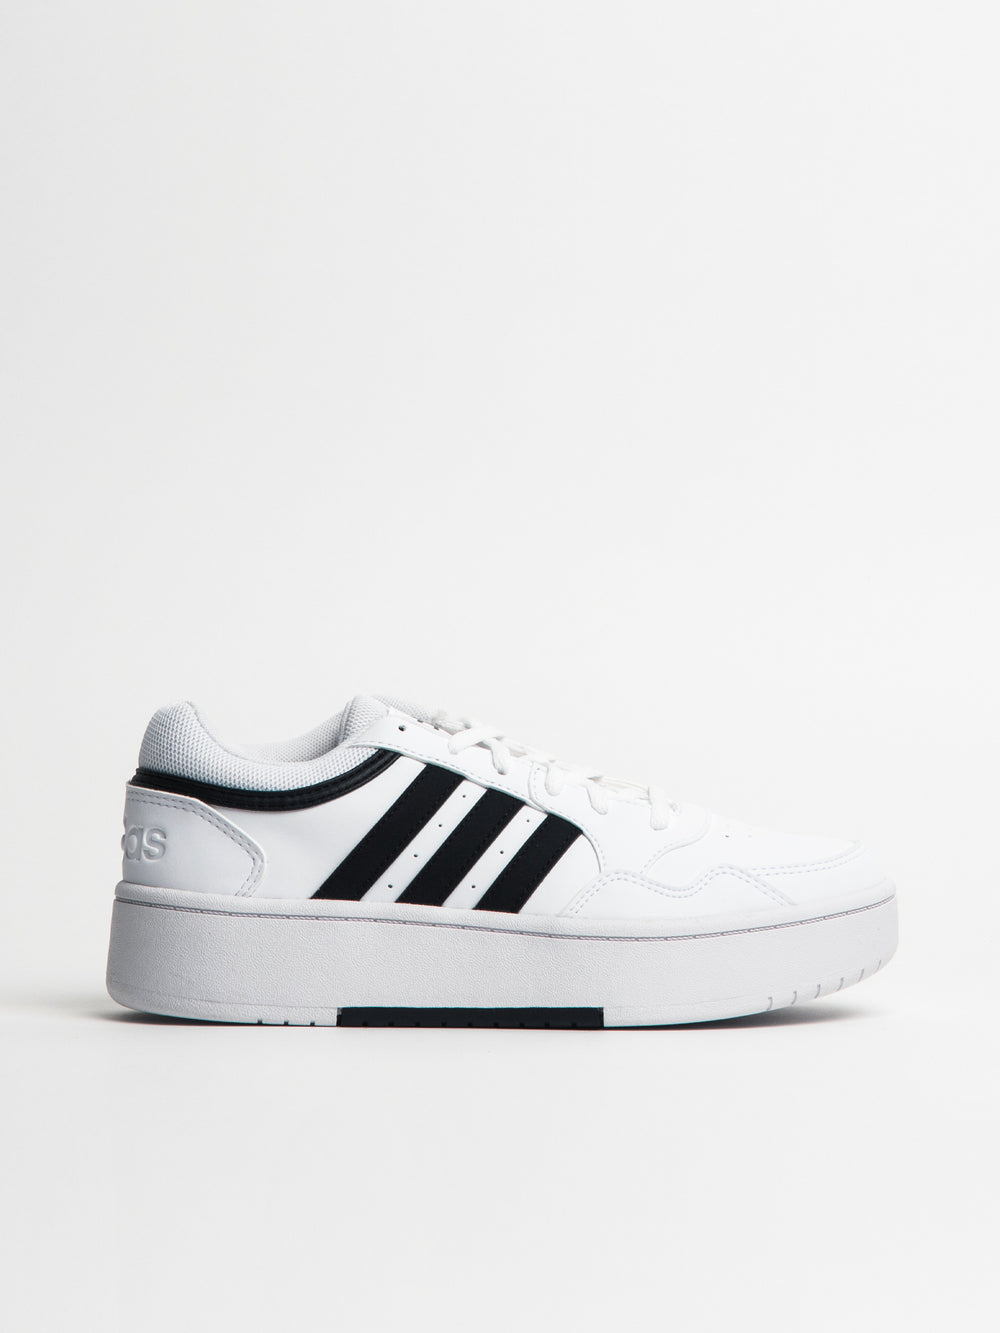 BASKETS ADIDAS HOOPS 3.0 BOLD POUR FEMMES